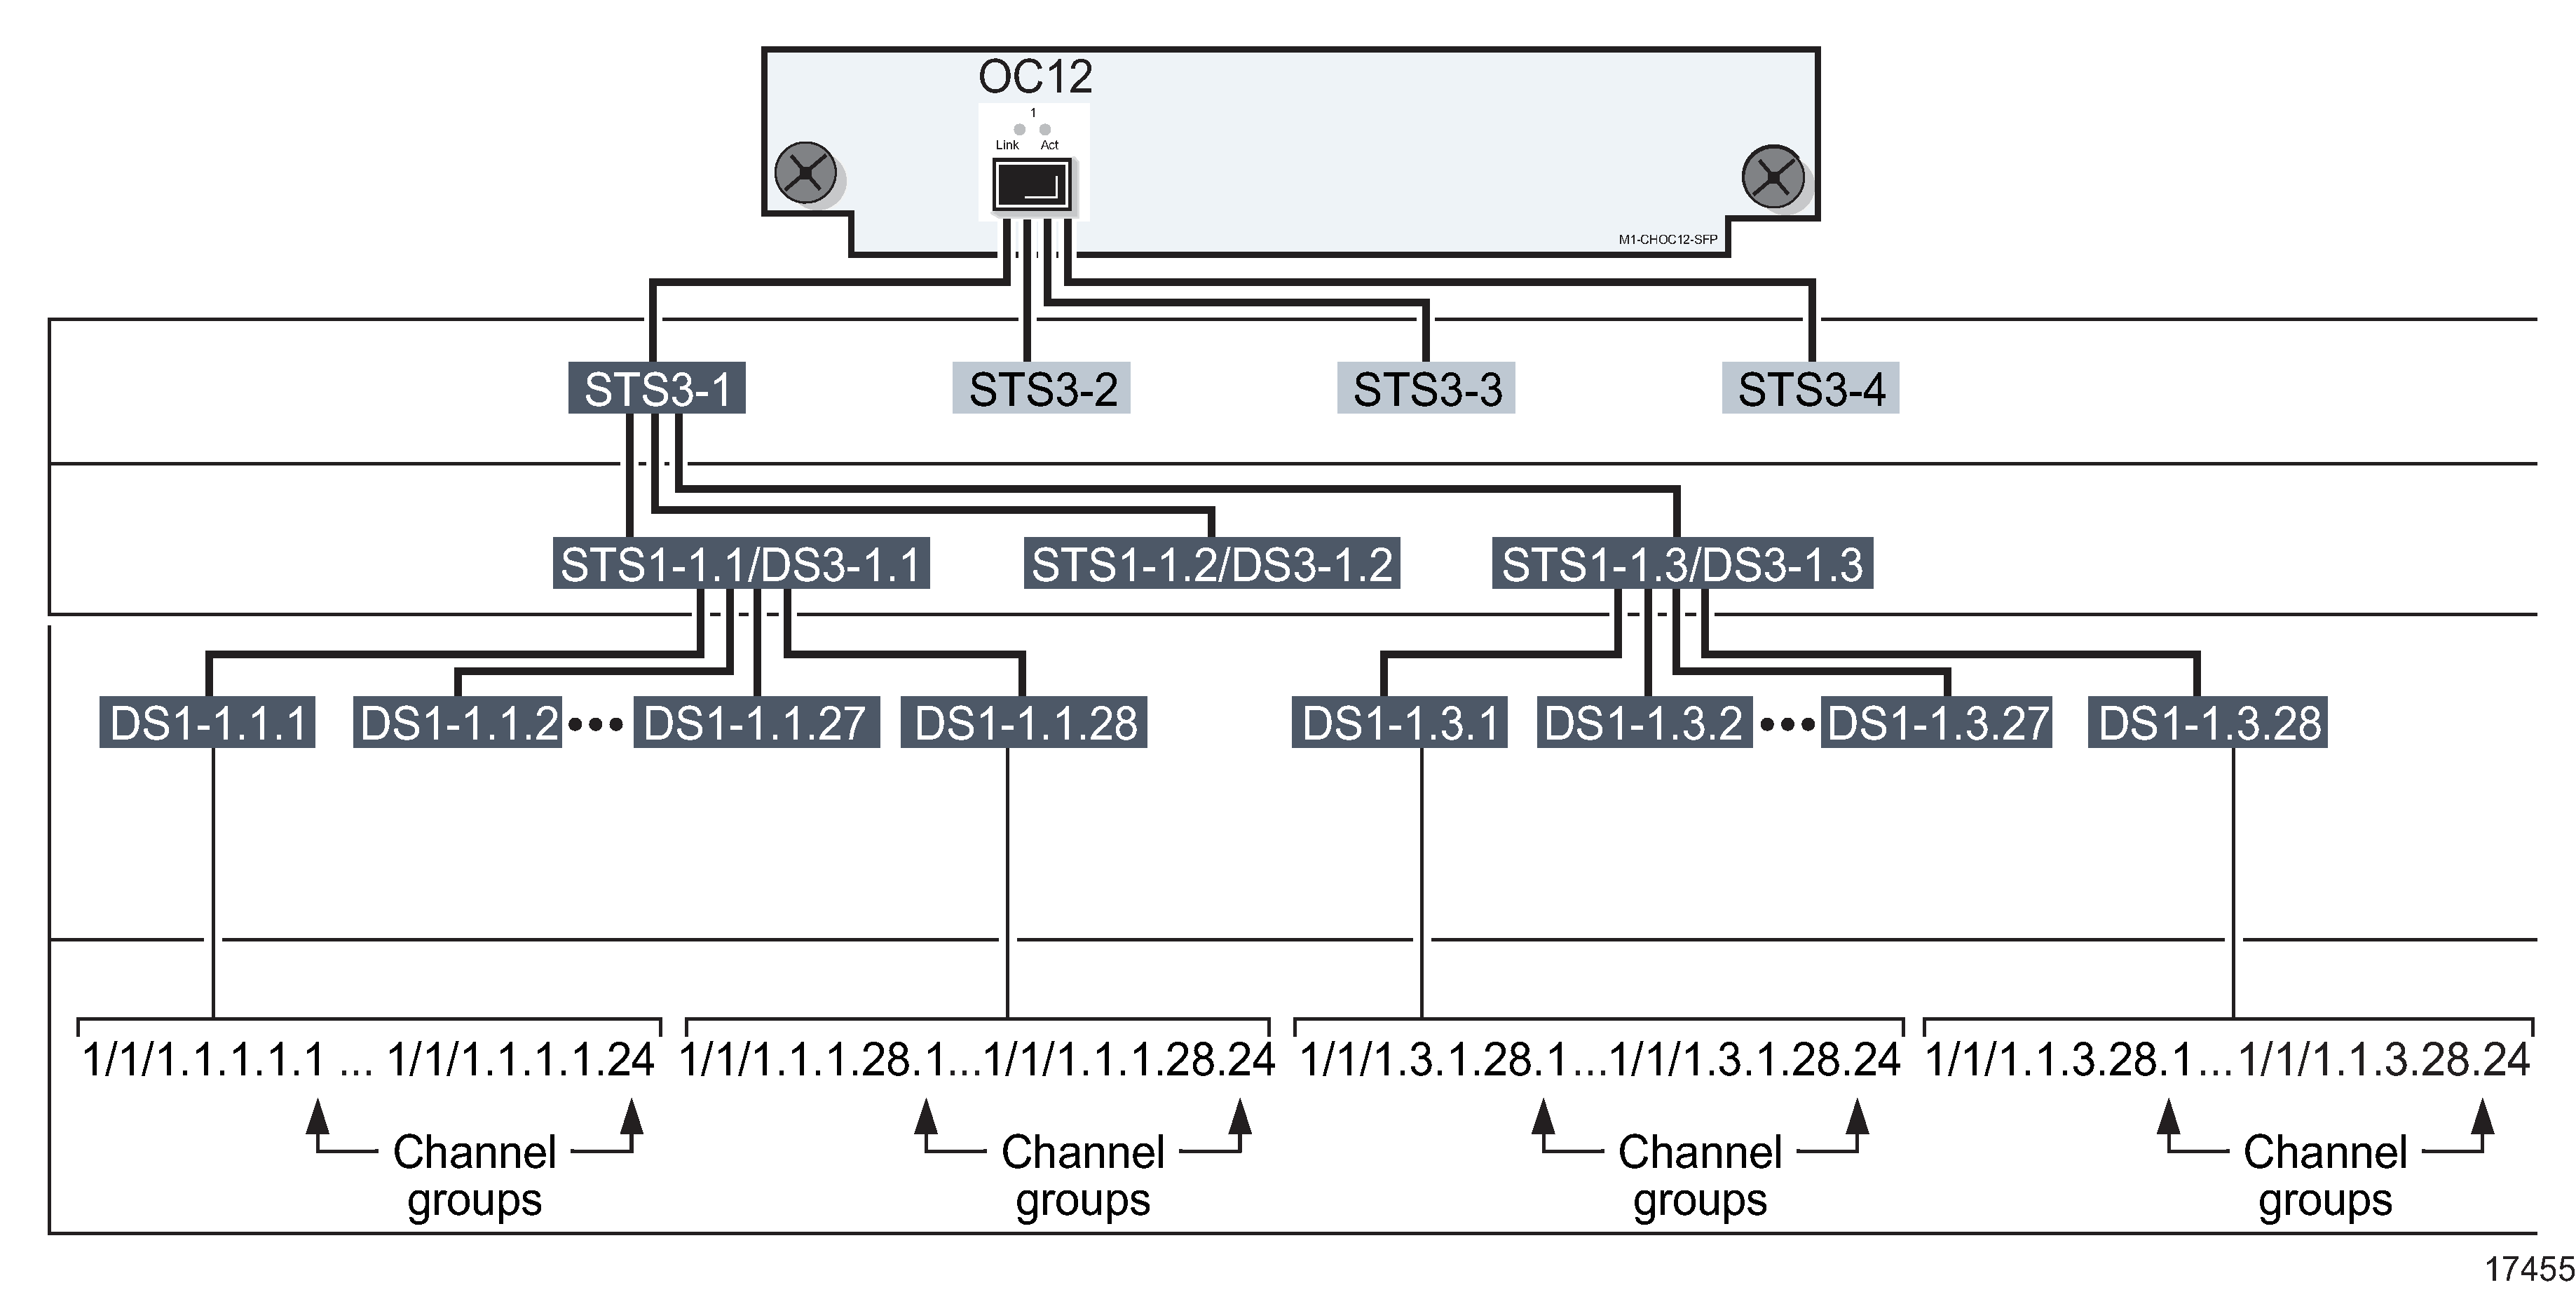 Channelized 1 × OC-12 port structure using STS-1/DS3 sub-channels